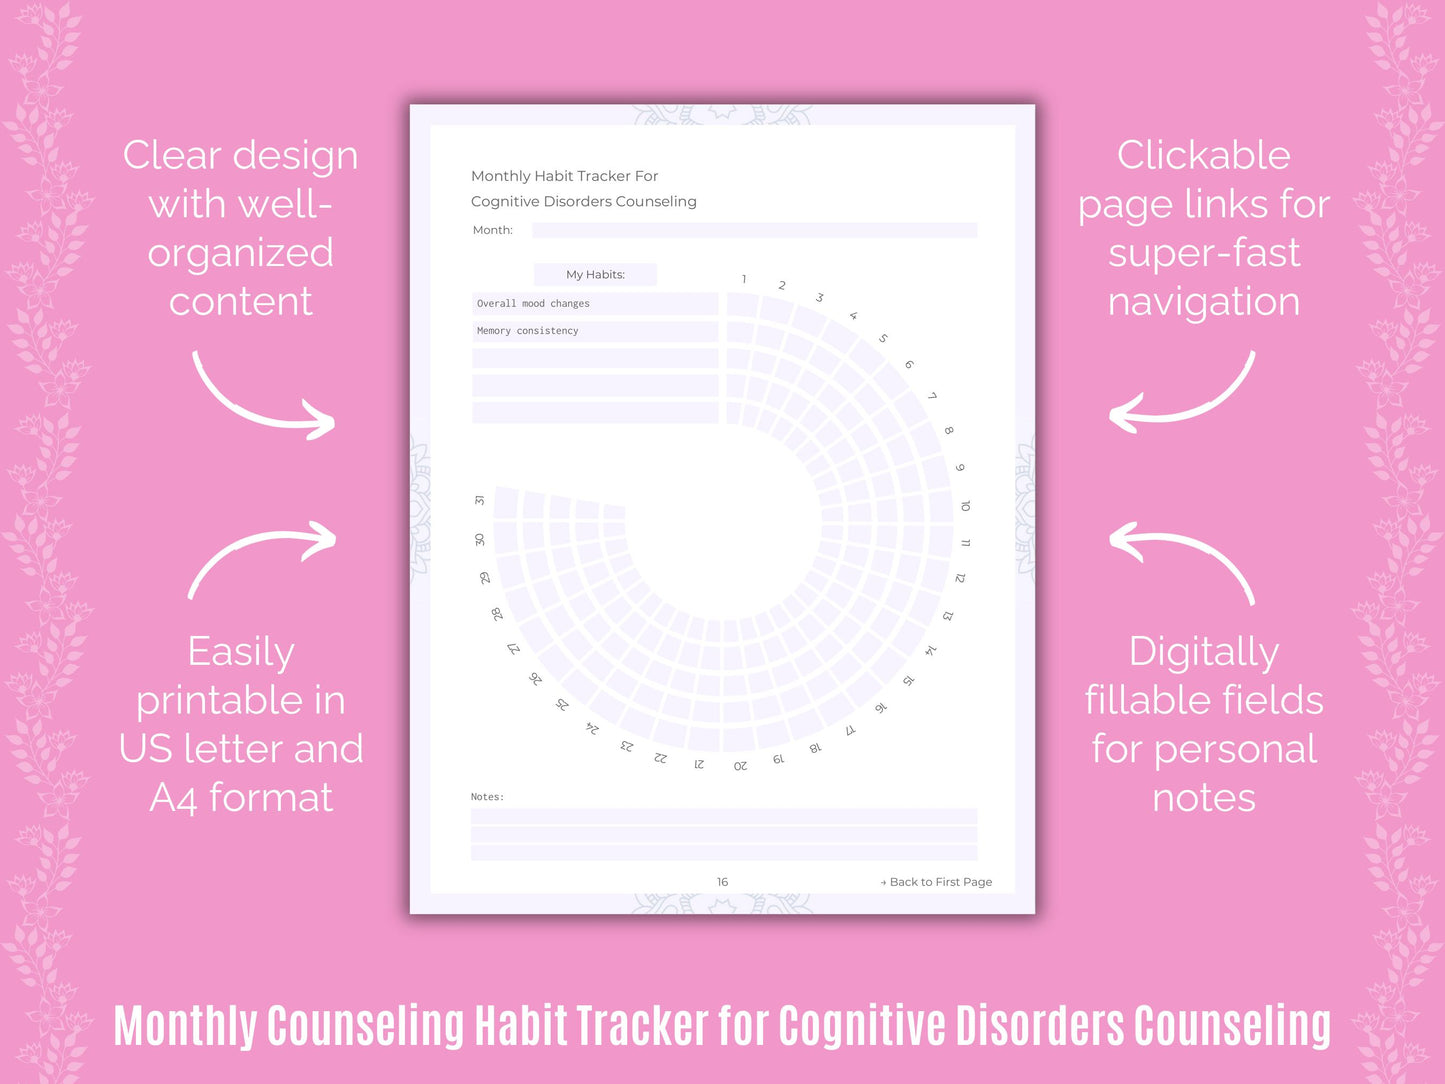 Cognitive Disorders Counseling Tracker